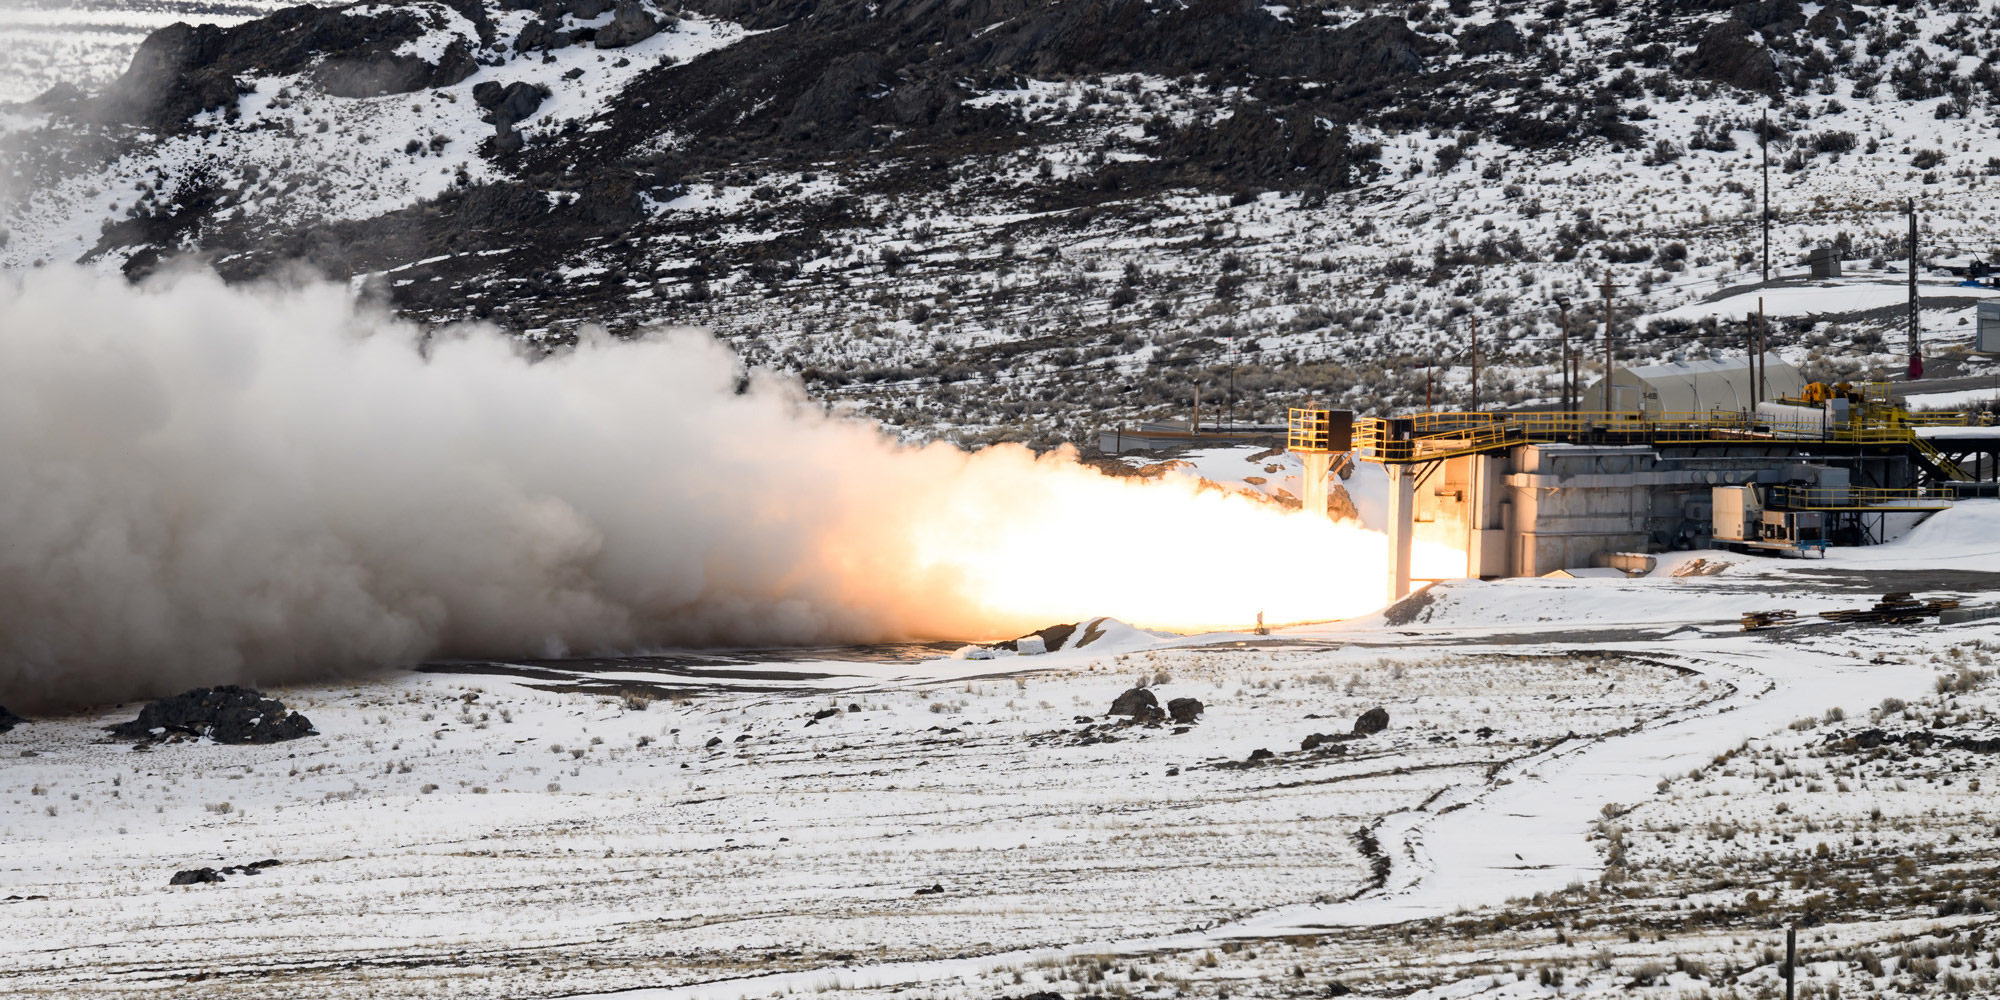 rocket motor test facility in the snow